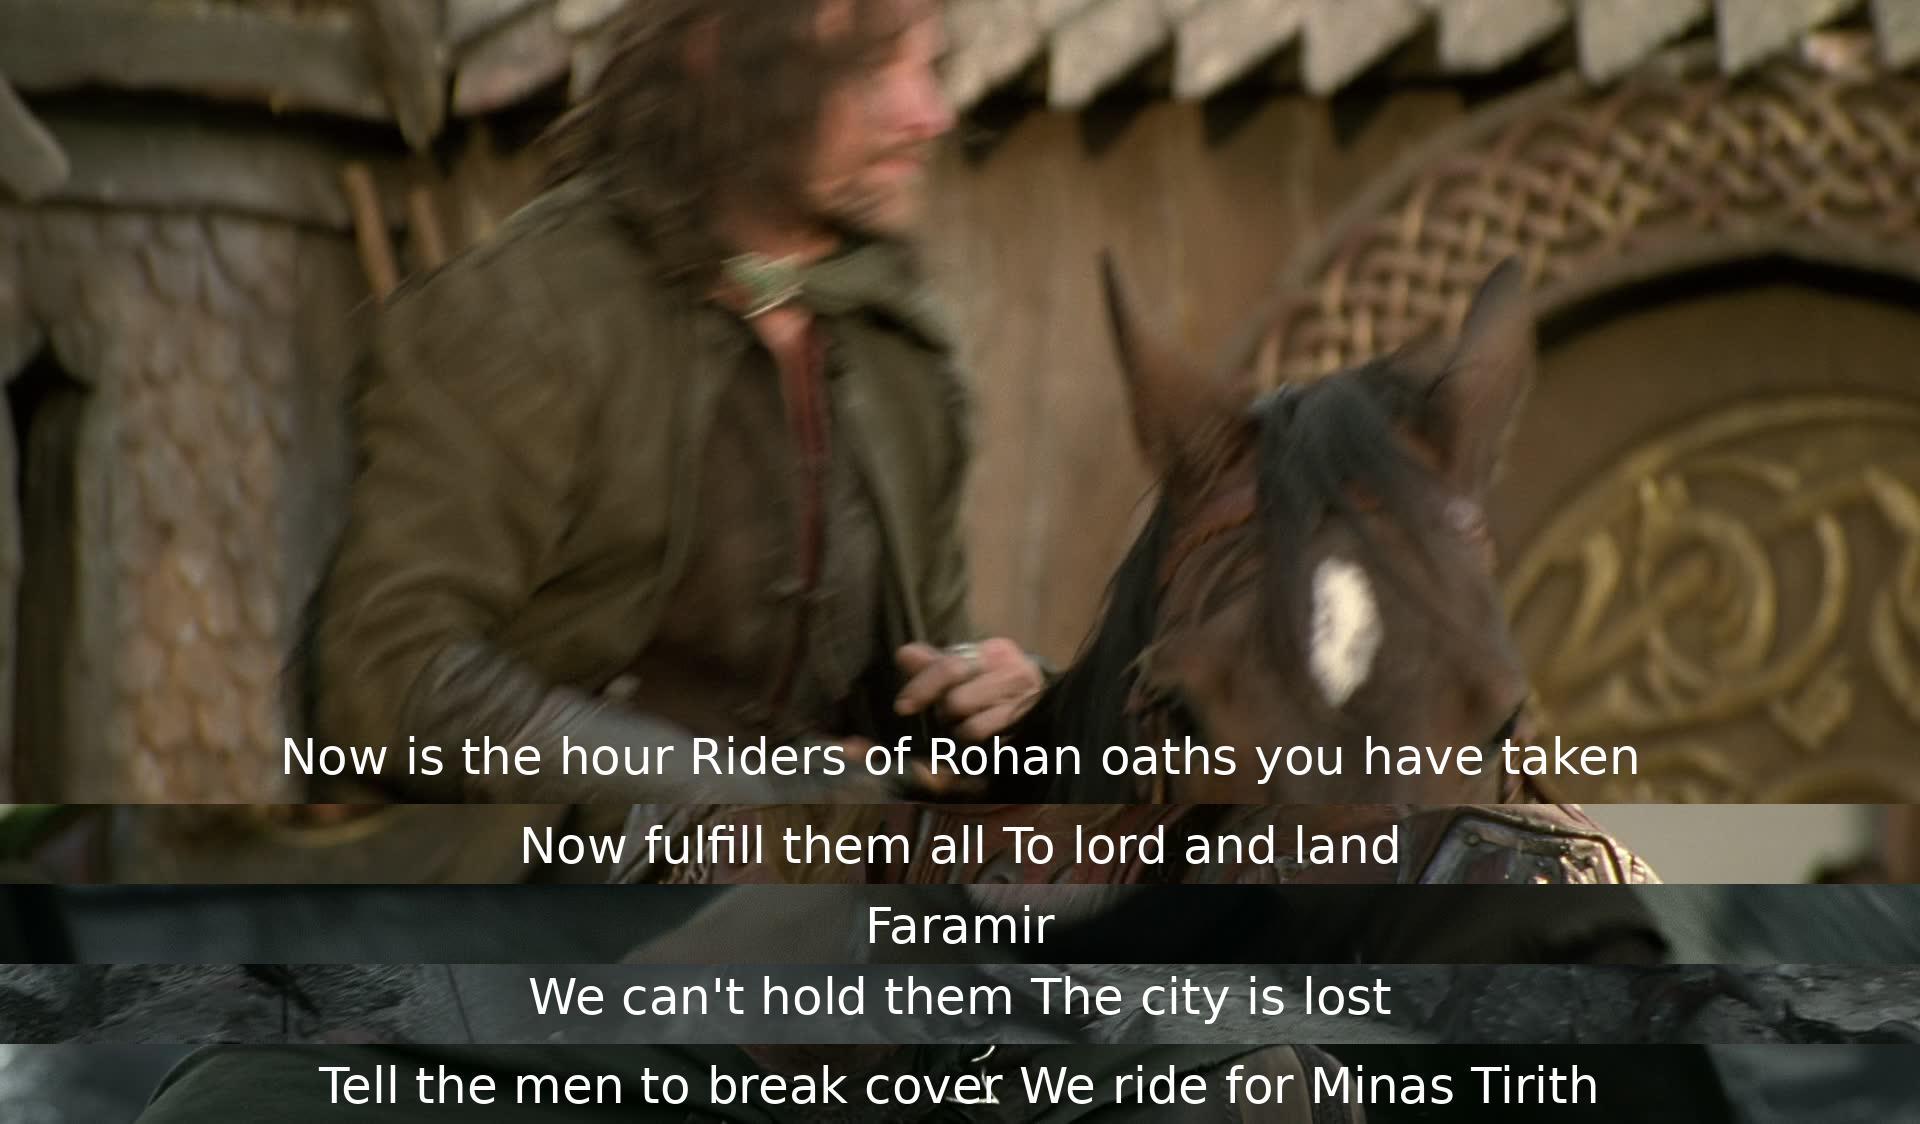 In a critical moment, the Riders of Rohan are called upon to fulfill their oaths to defend their lord and land. Faramir realizes the city is lost and urges his men to ride for Minas Tirith without delay.